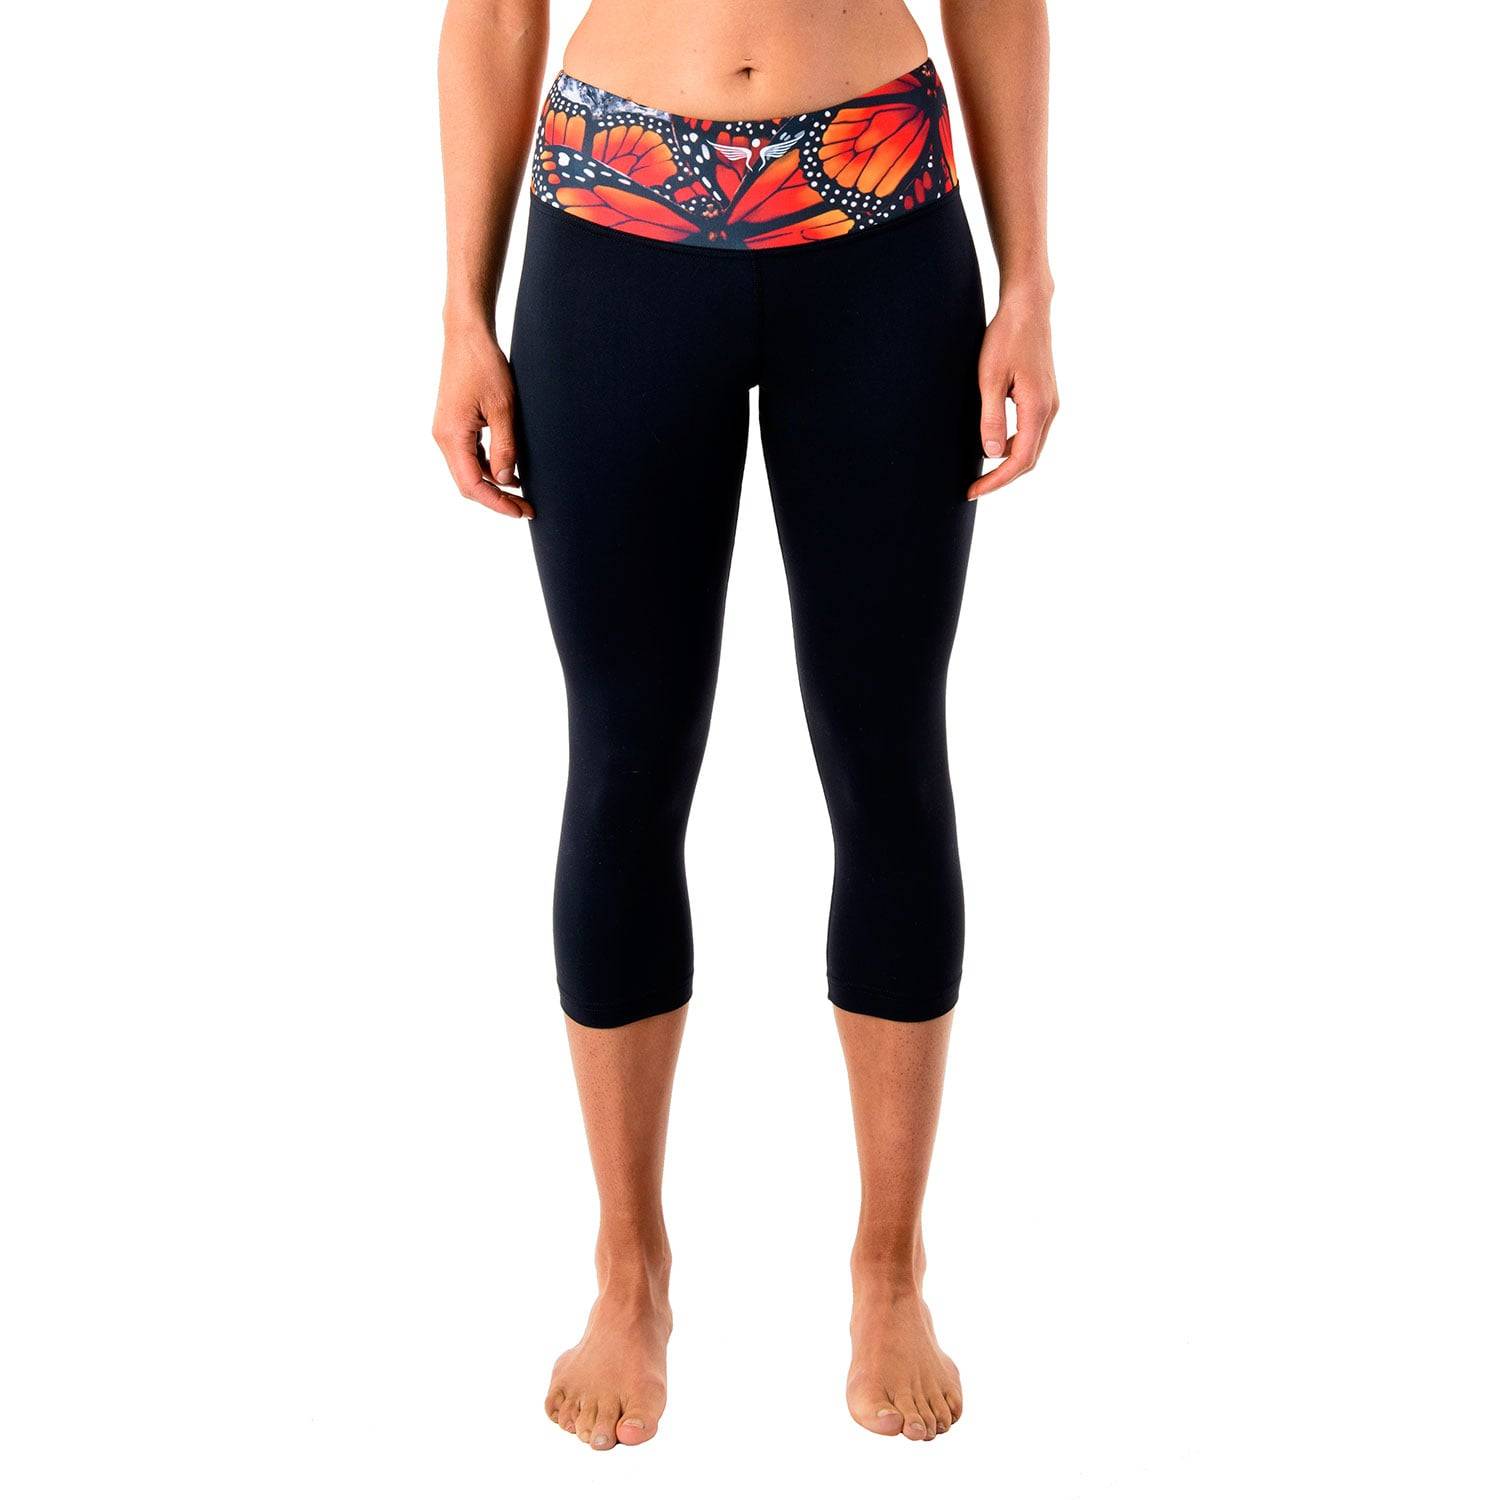 Courageous Freedom 3/4 Legging - Courage My Love